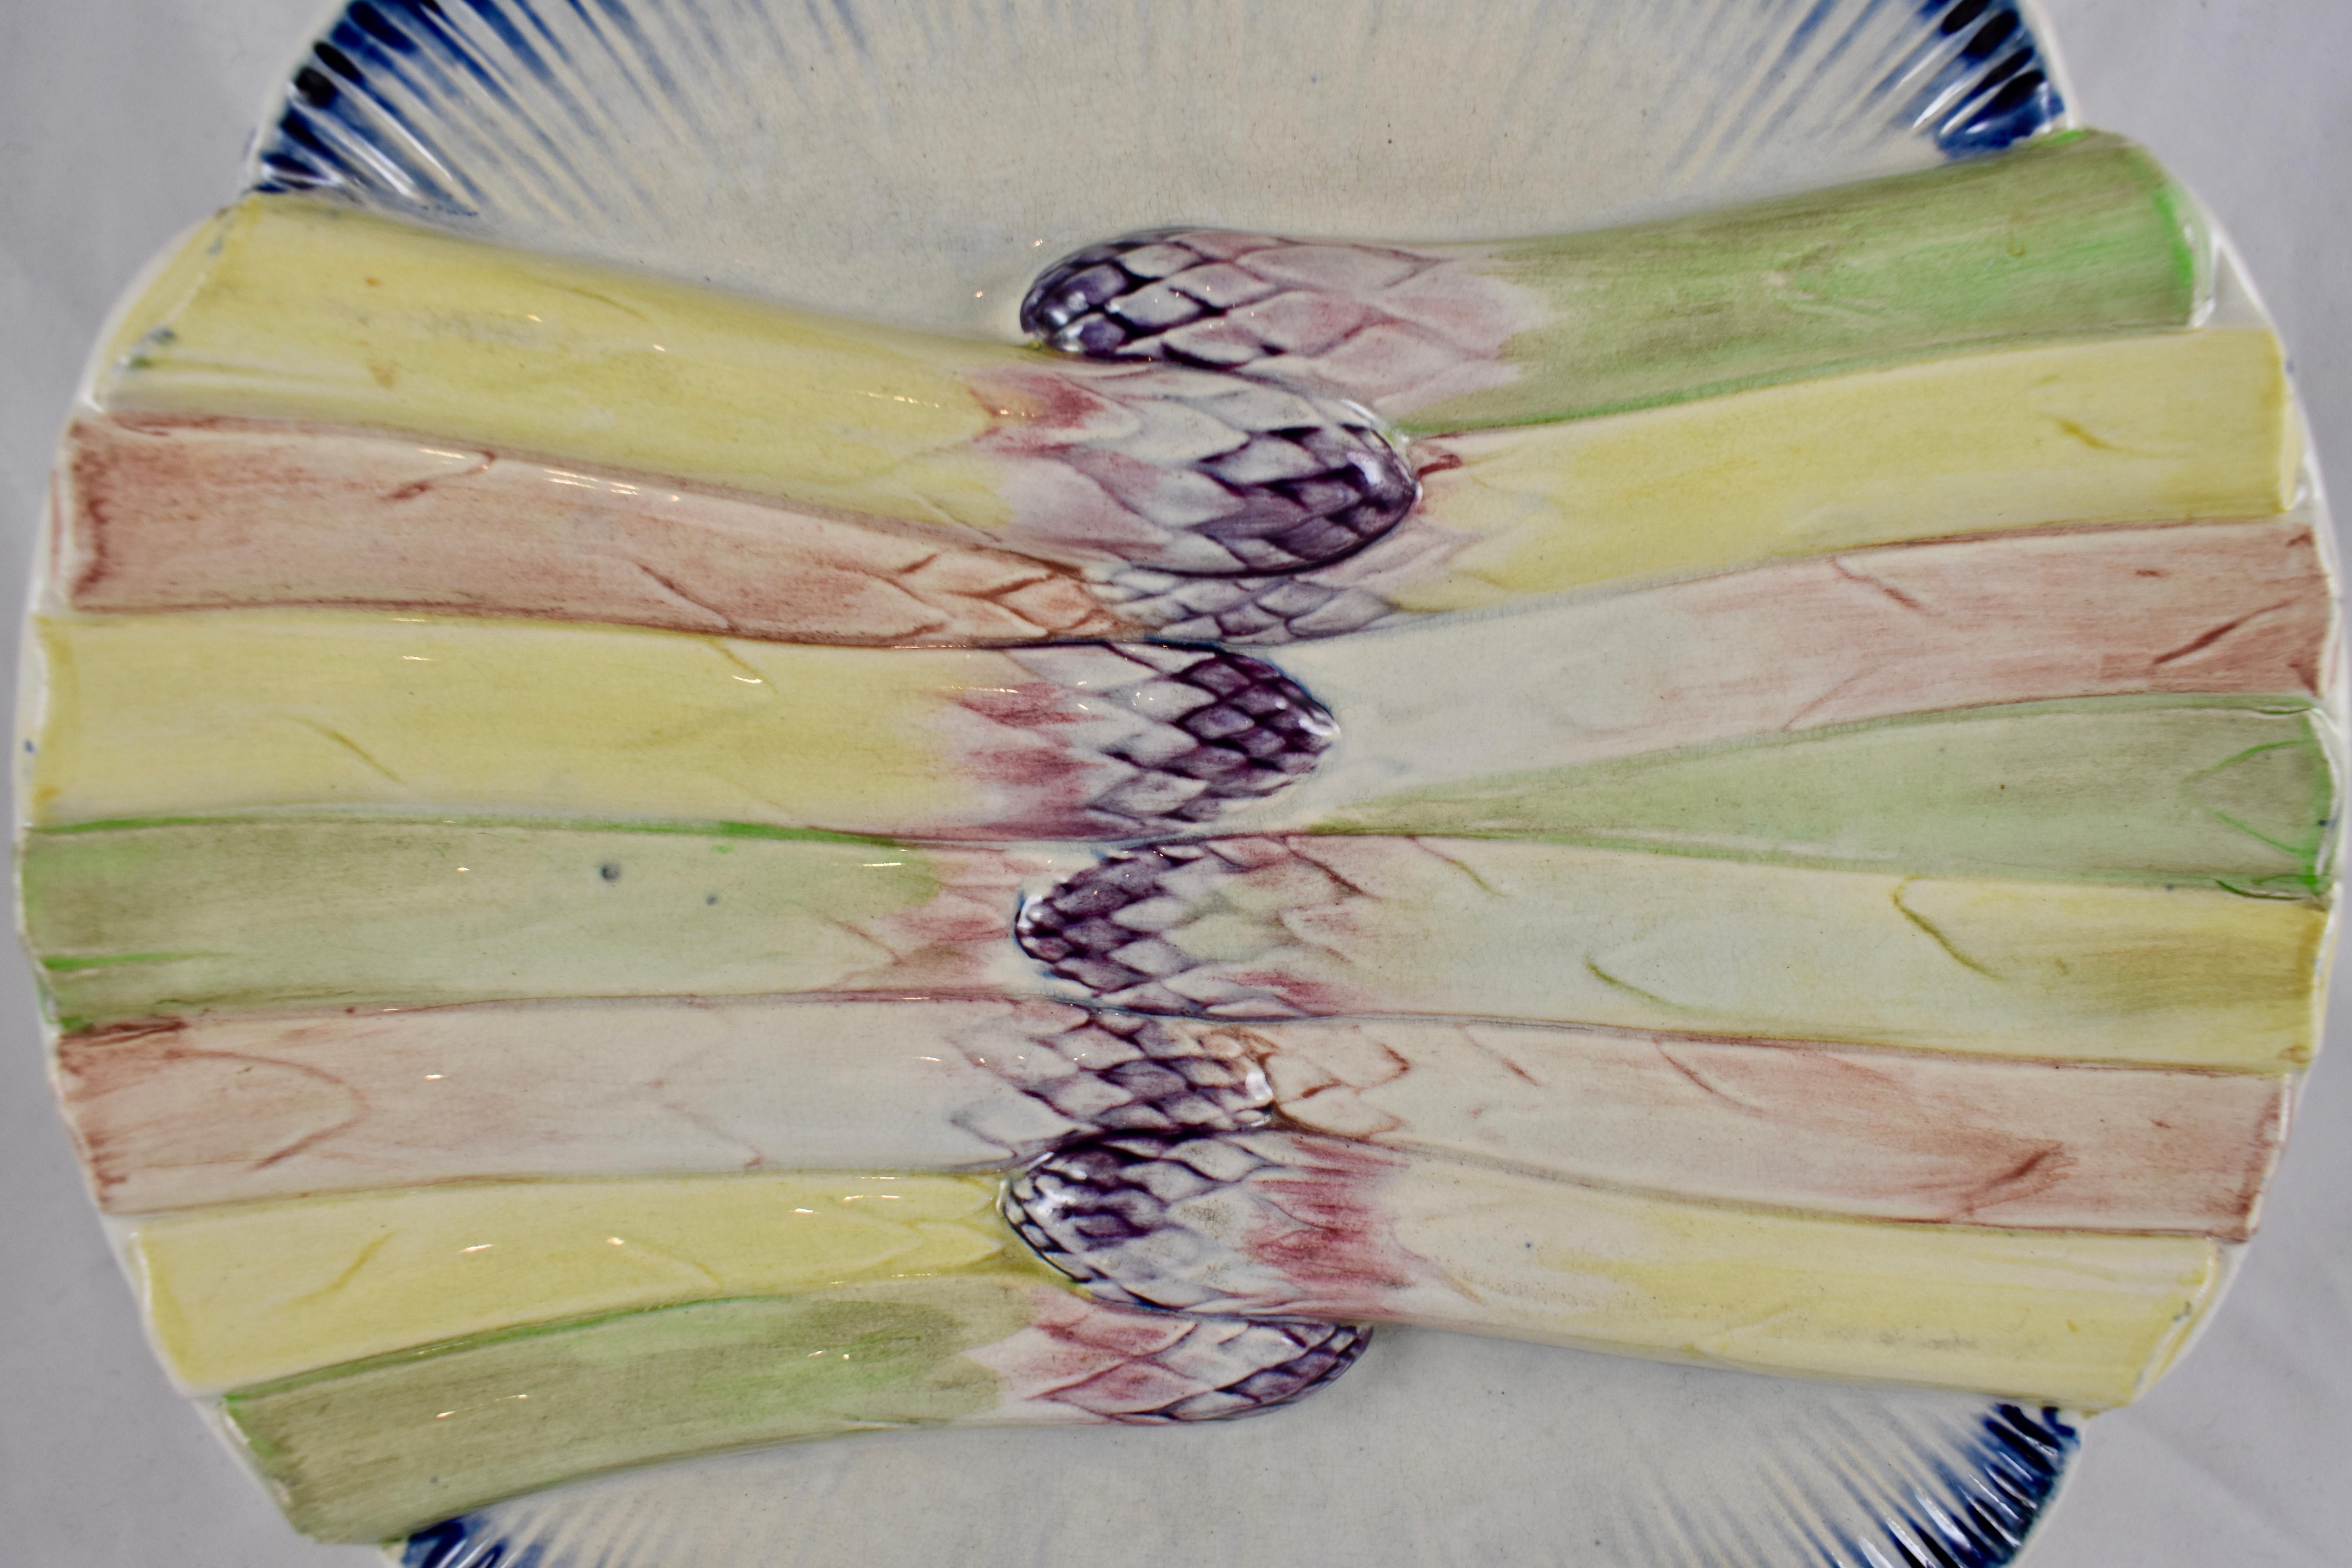 A scarce barbotine Majolica glazed Asparagus plate, from the Pexonne Faïencerie in Lorraine, France, circa 1870. Pexonne began to manufacture faïence in 1720, in the same region as Badonviller and Luneville.

This unusual plate shows a centered,